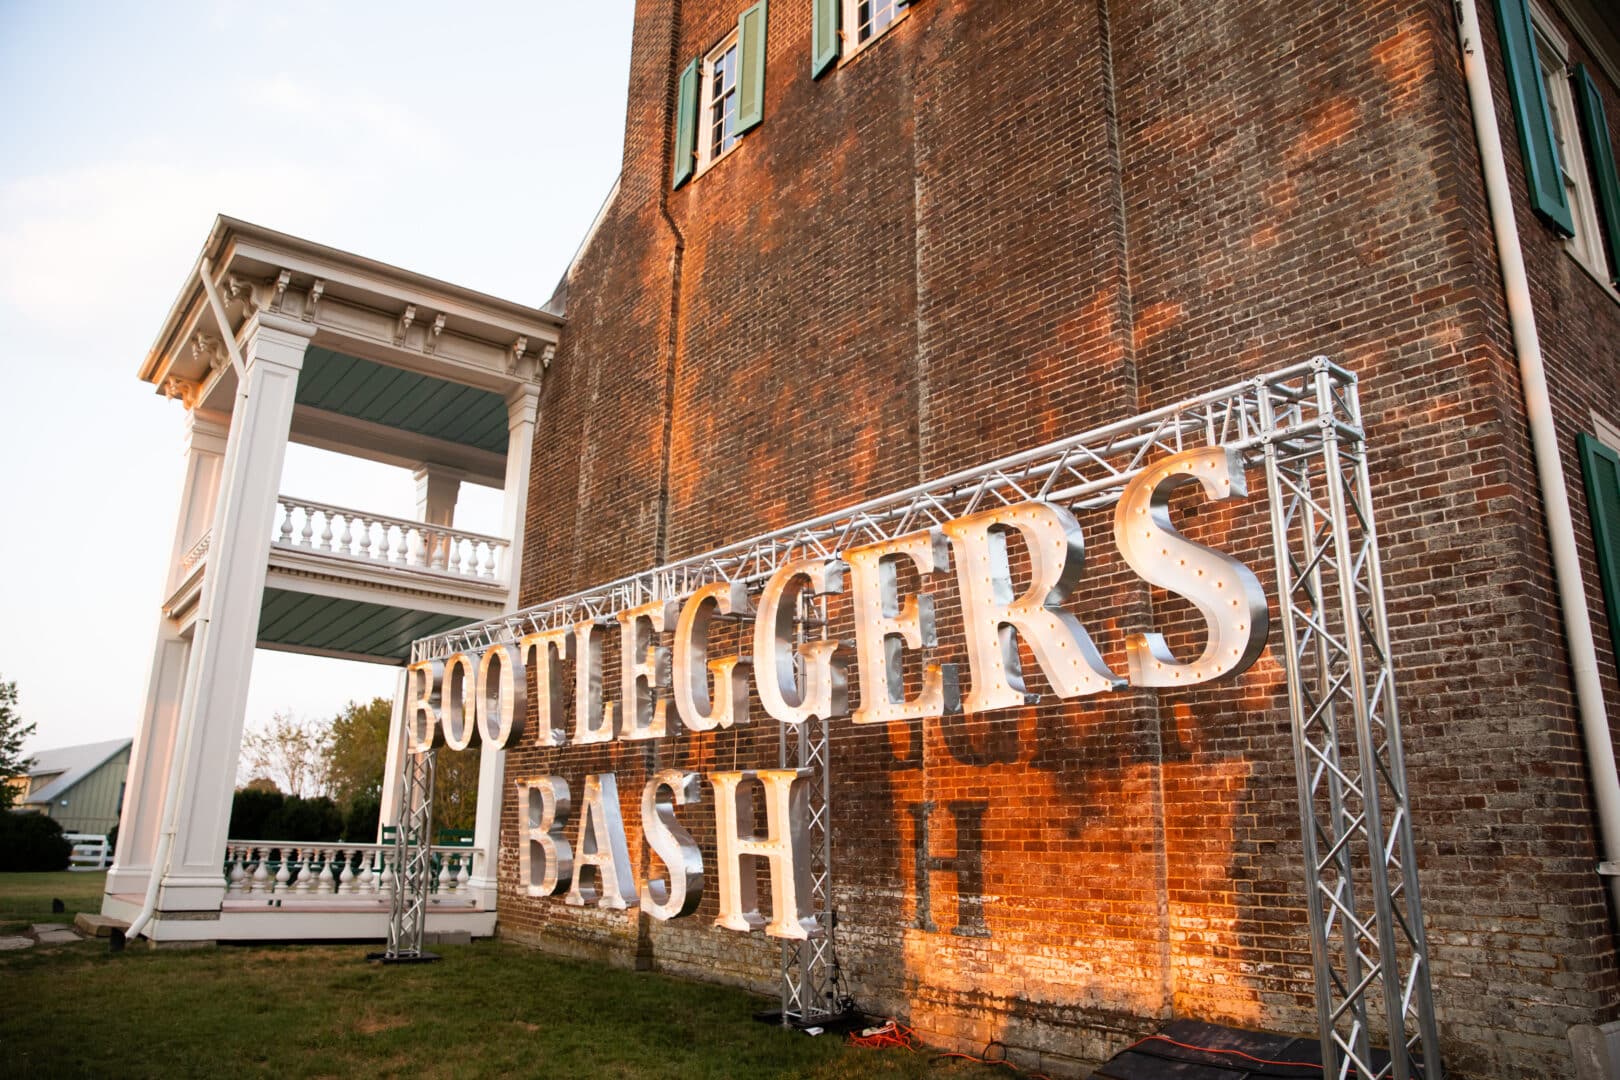 Bootlegger's Bash, a Franklin, TN event that invites guests to celebrate Williamson County’s unique history of bootlegging featuring Tennessee distillers, a traditional Southern dinner and live entertainment featuring Rock & Roll Pianos – a dueling piano team.